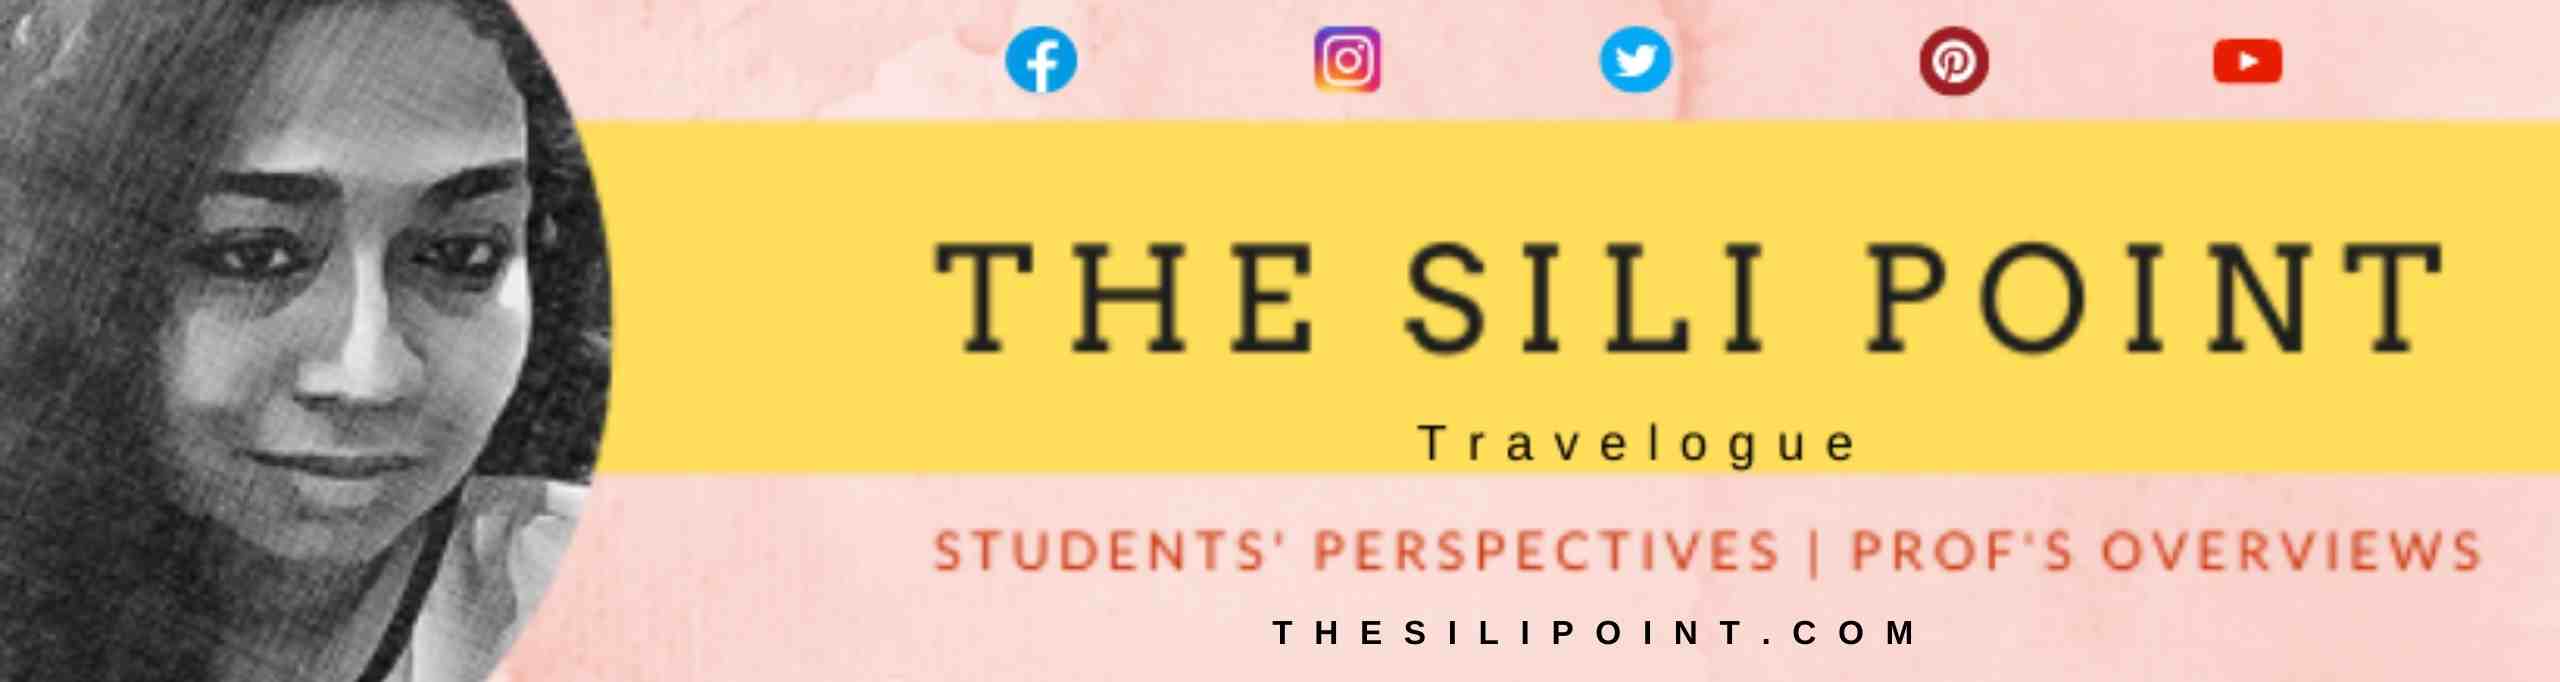 The Sili Point Travelogue